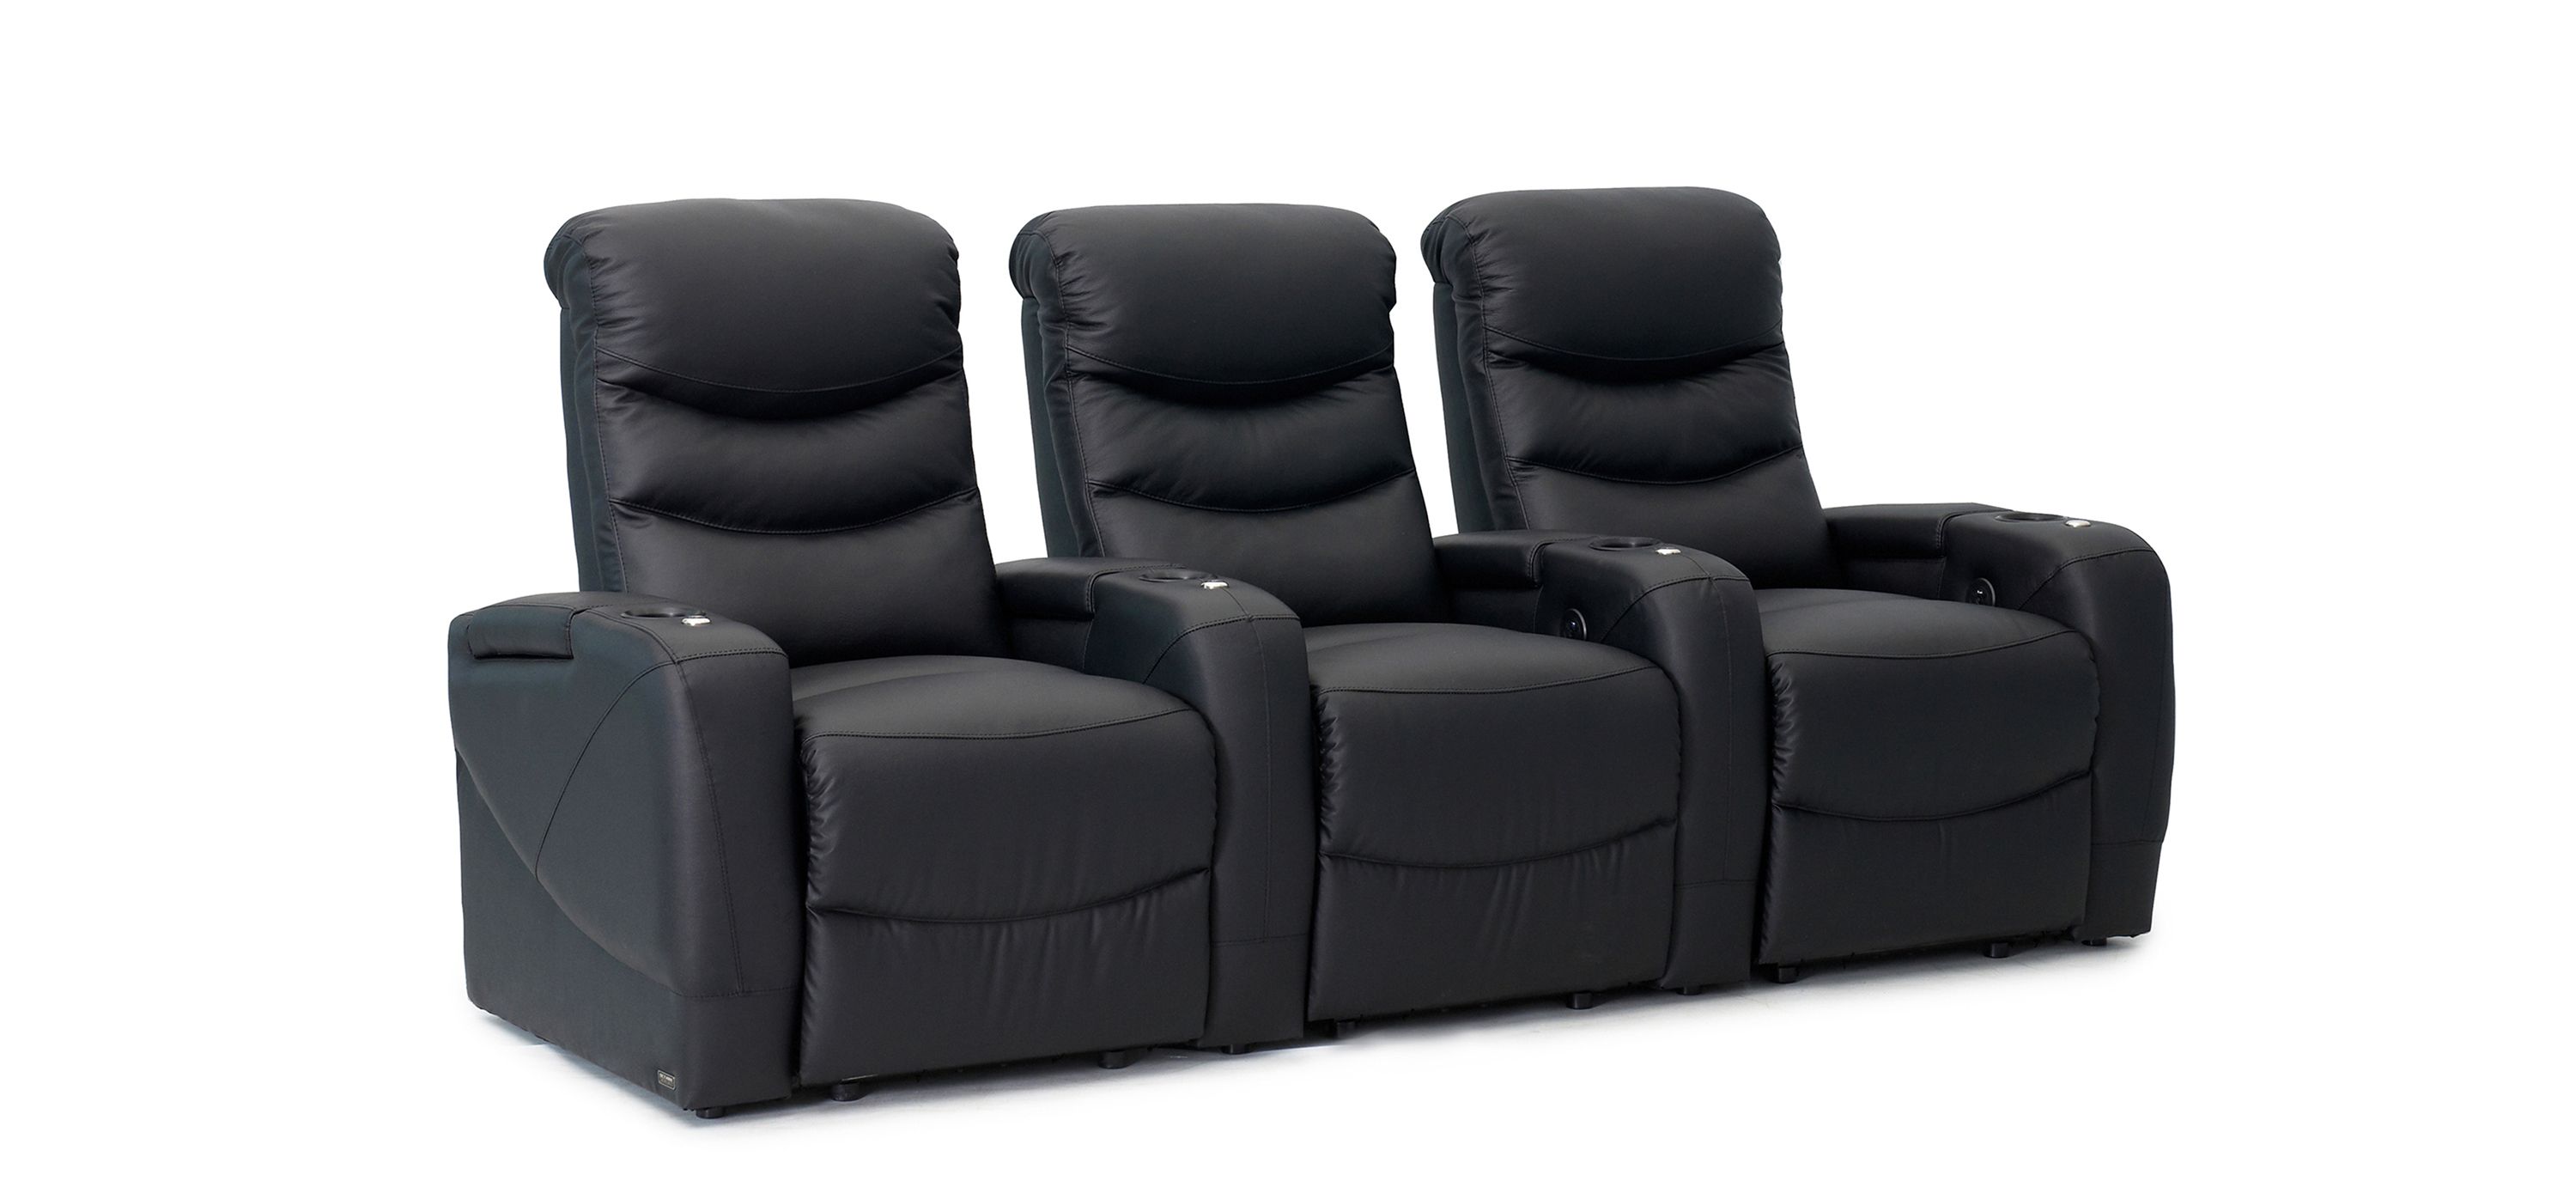 Majestic 3-pc. Leather Reclining Sectional Sofa